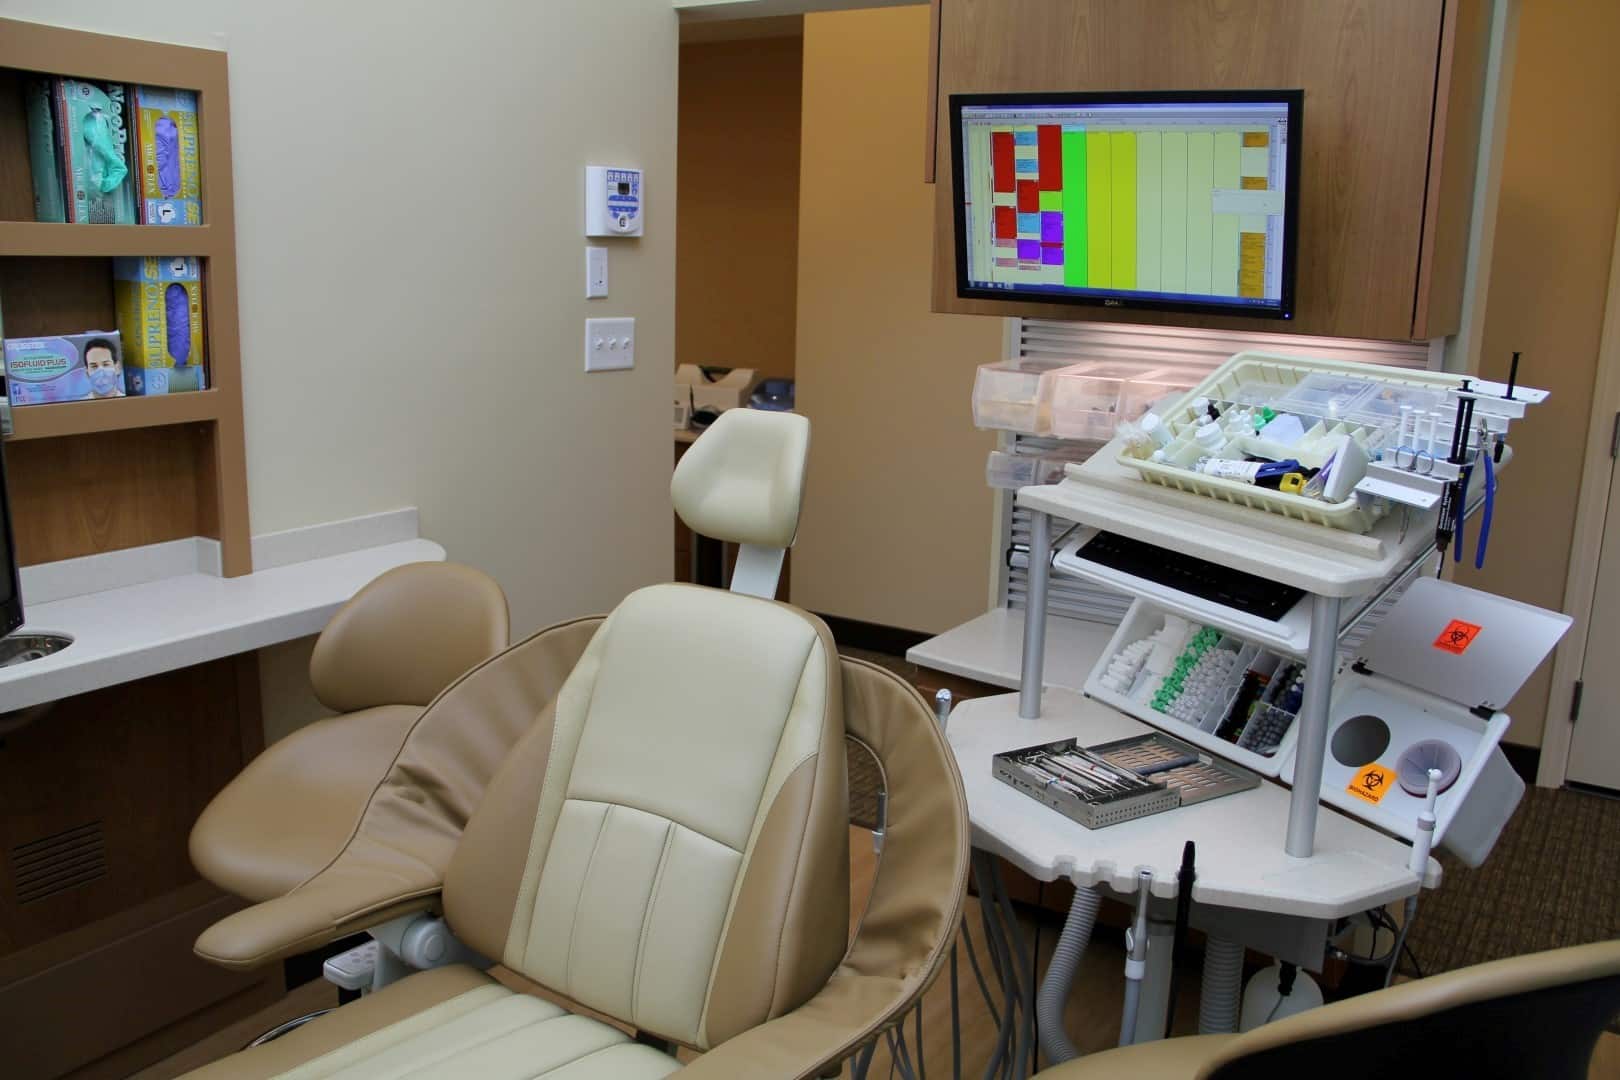 Dental assistant view of patient chair and workstation